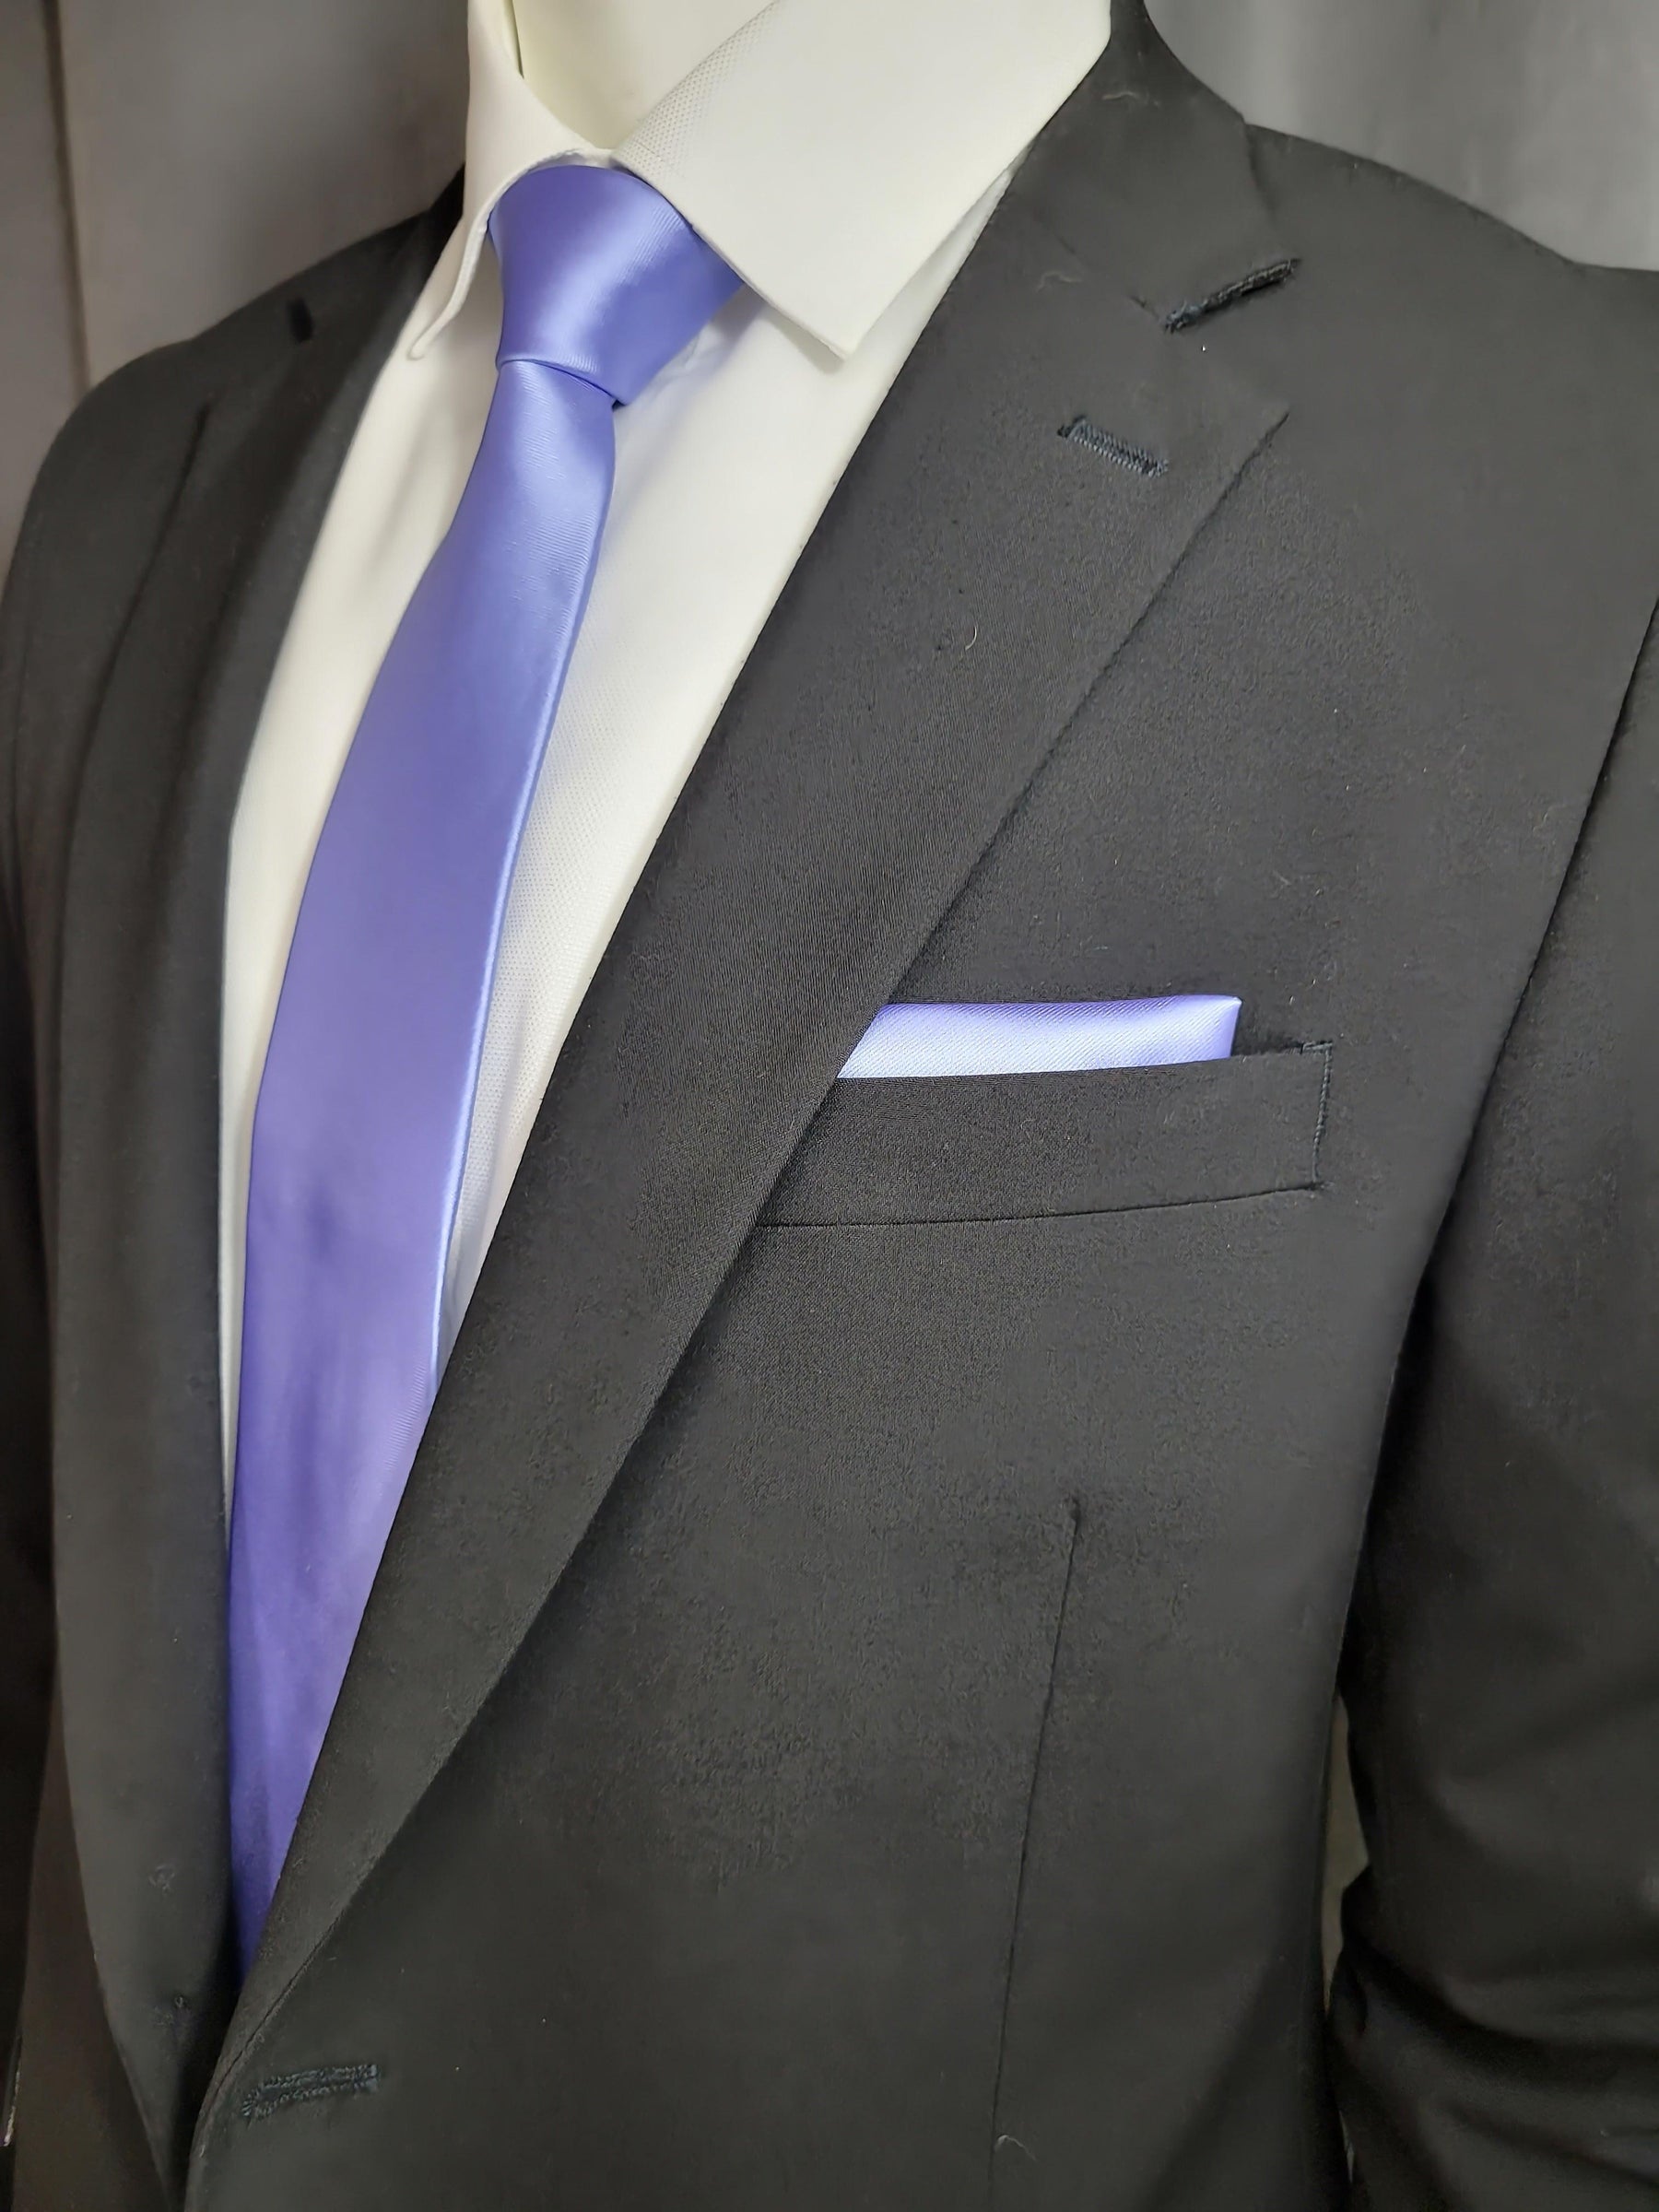 Purple Periwinkle Necktie and Pocket Square - The Upscale Banker